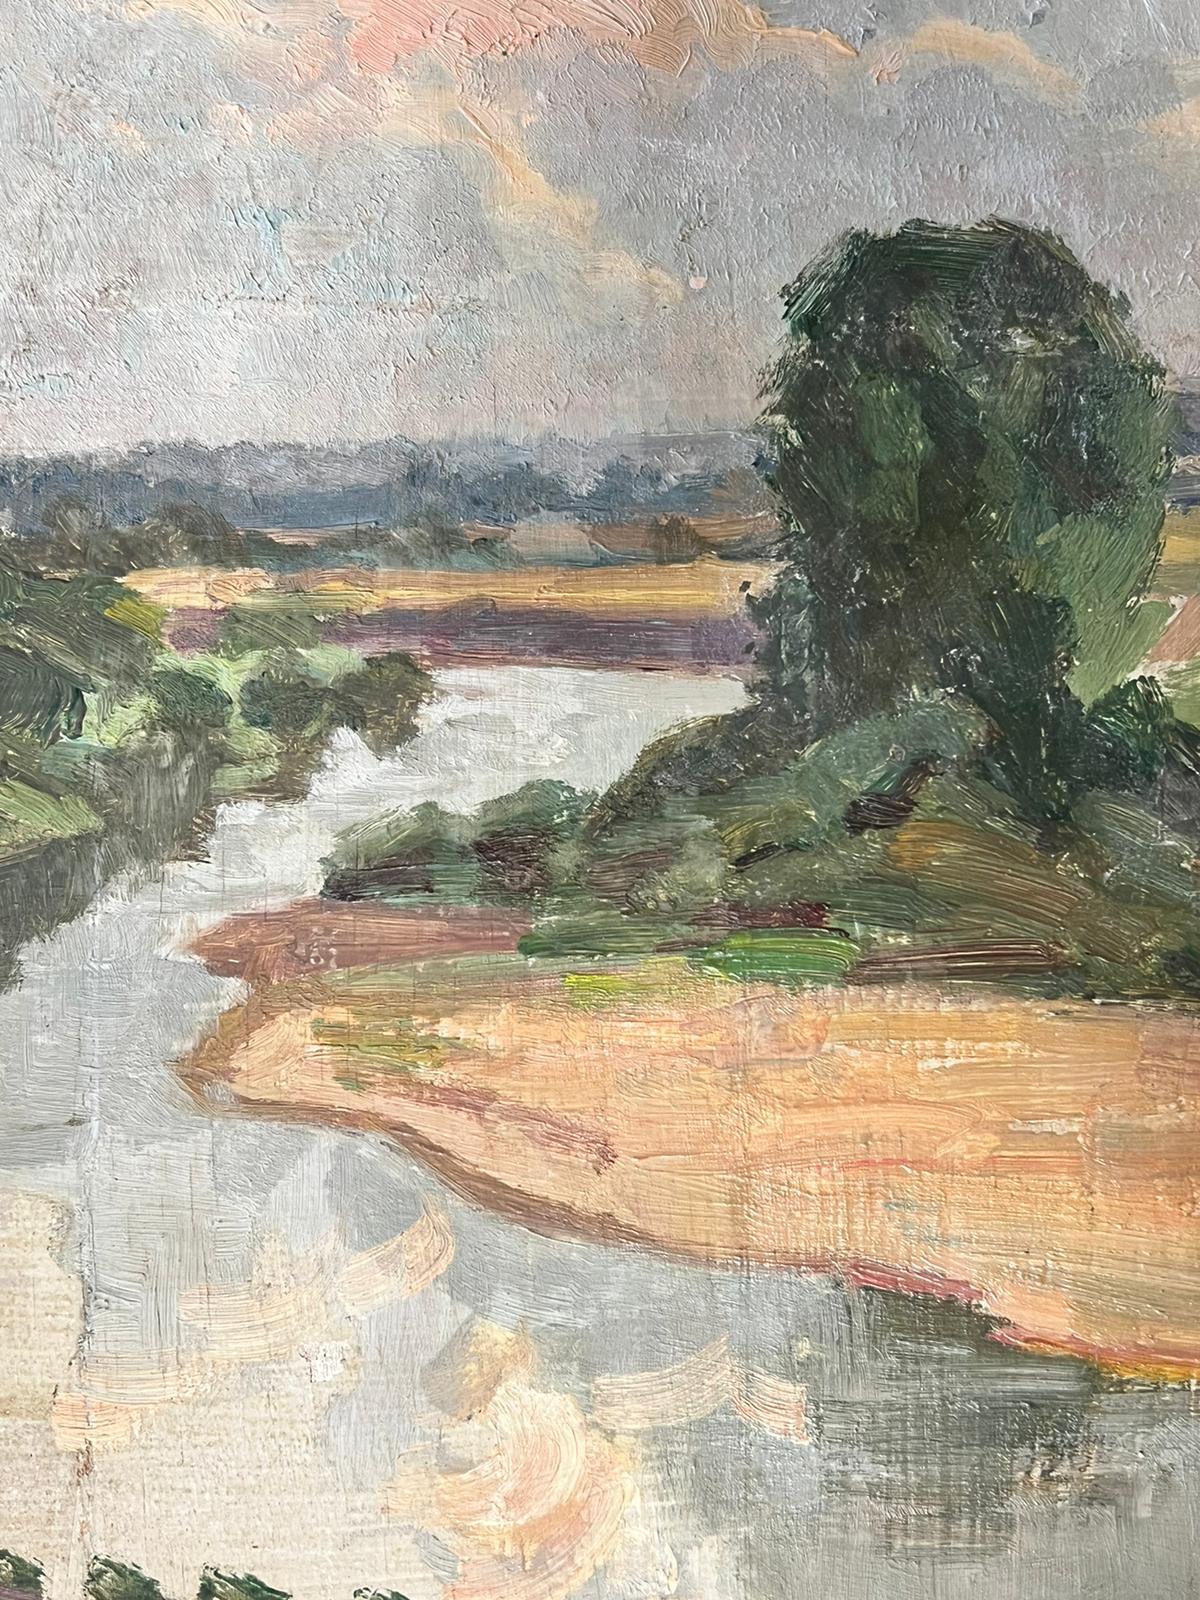 Artist/ School: Suzanne Crochet (French c. 1930), female French Impressionist artist

Title: The Winding River

Medium: oil on board, unframed

Size:

board: 13 x 9.5 inches

Provenance: private collection, France

Condition: The painting is in